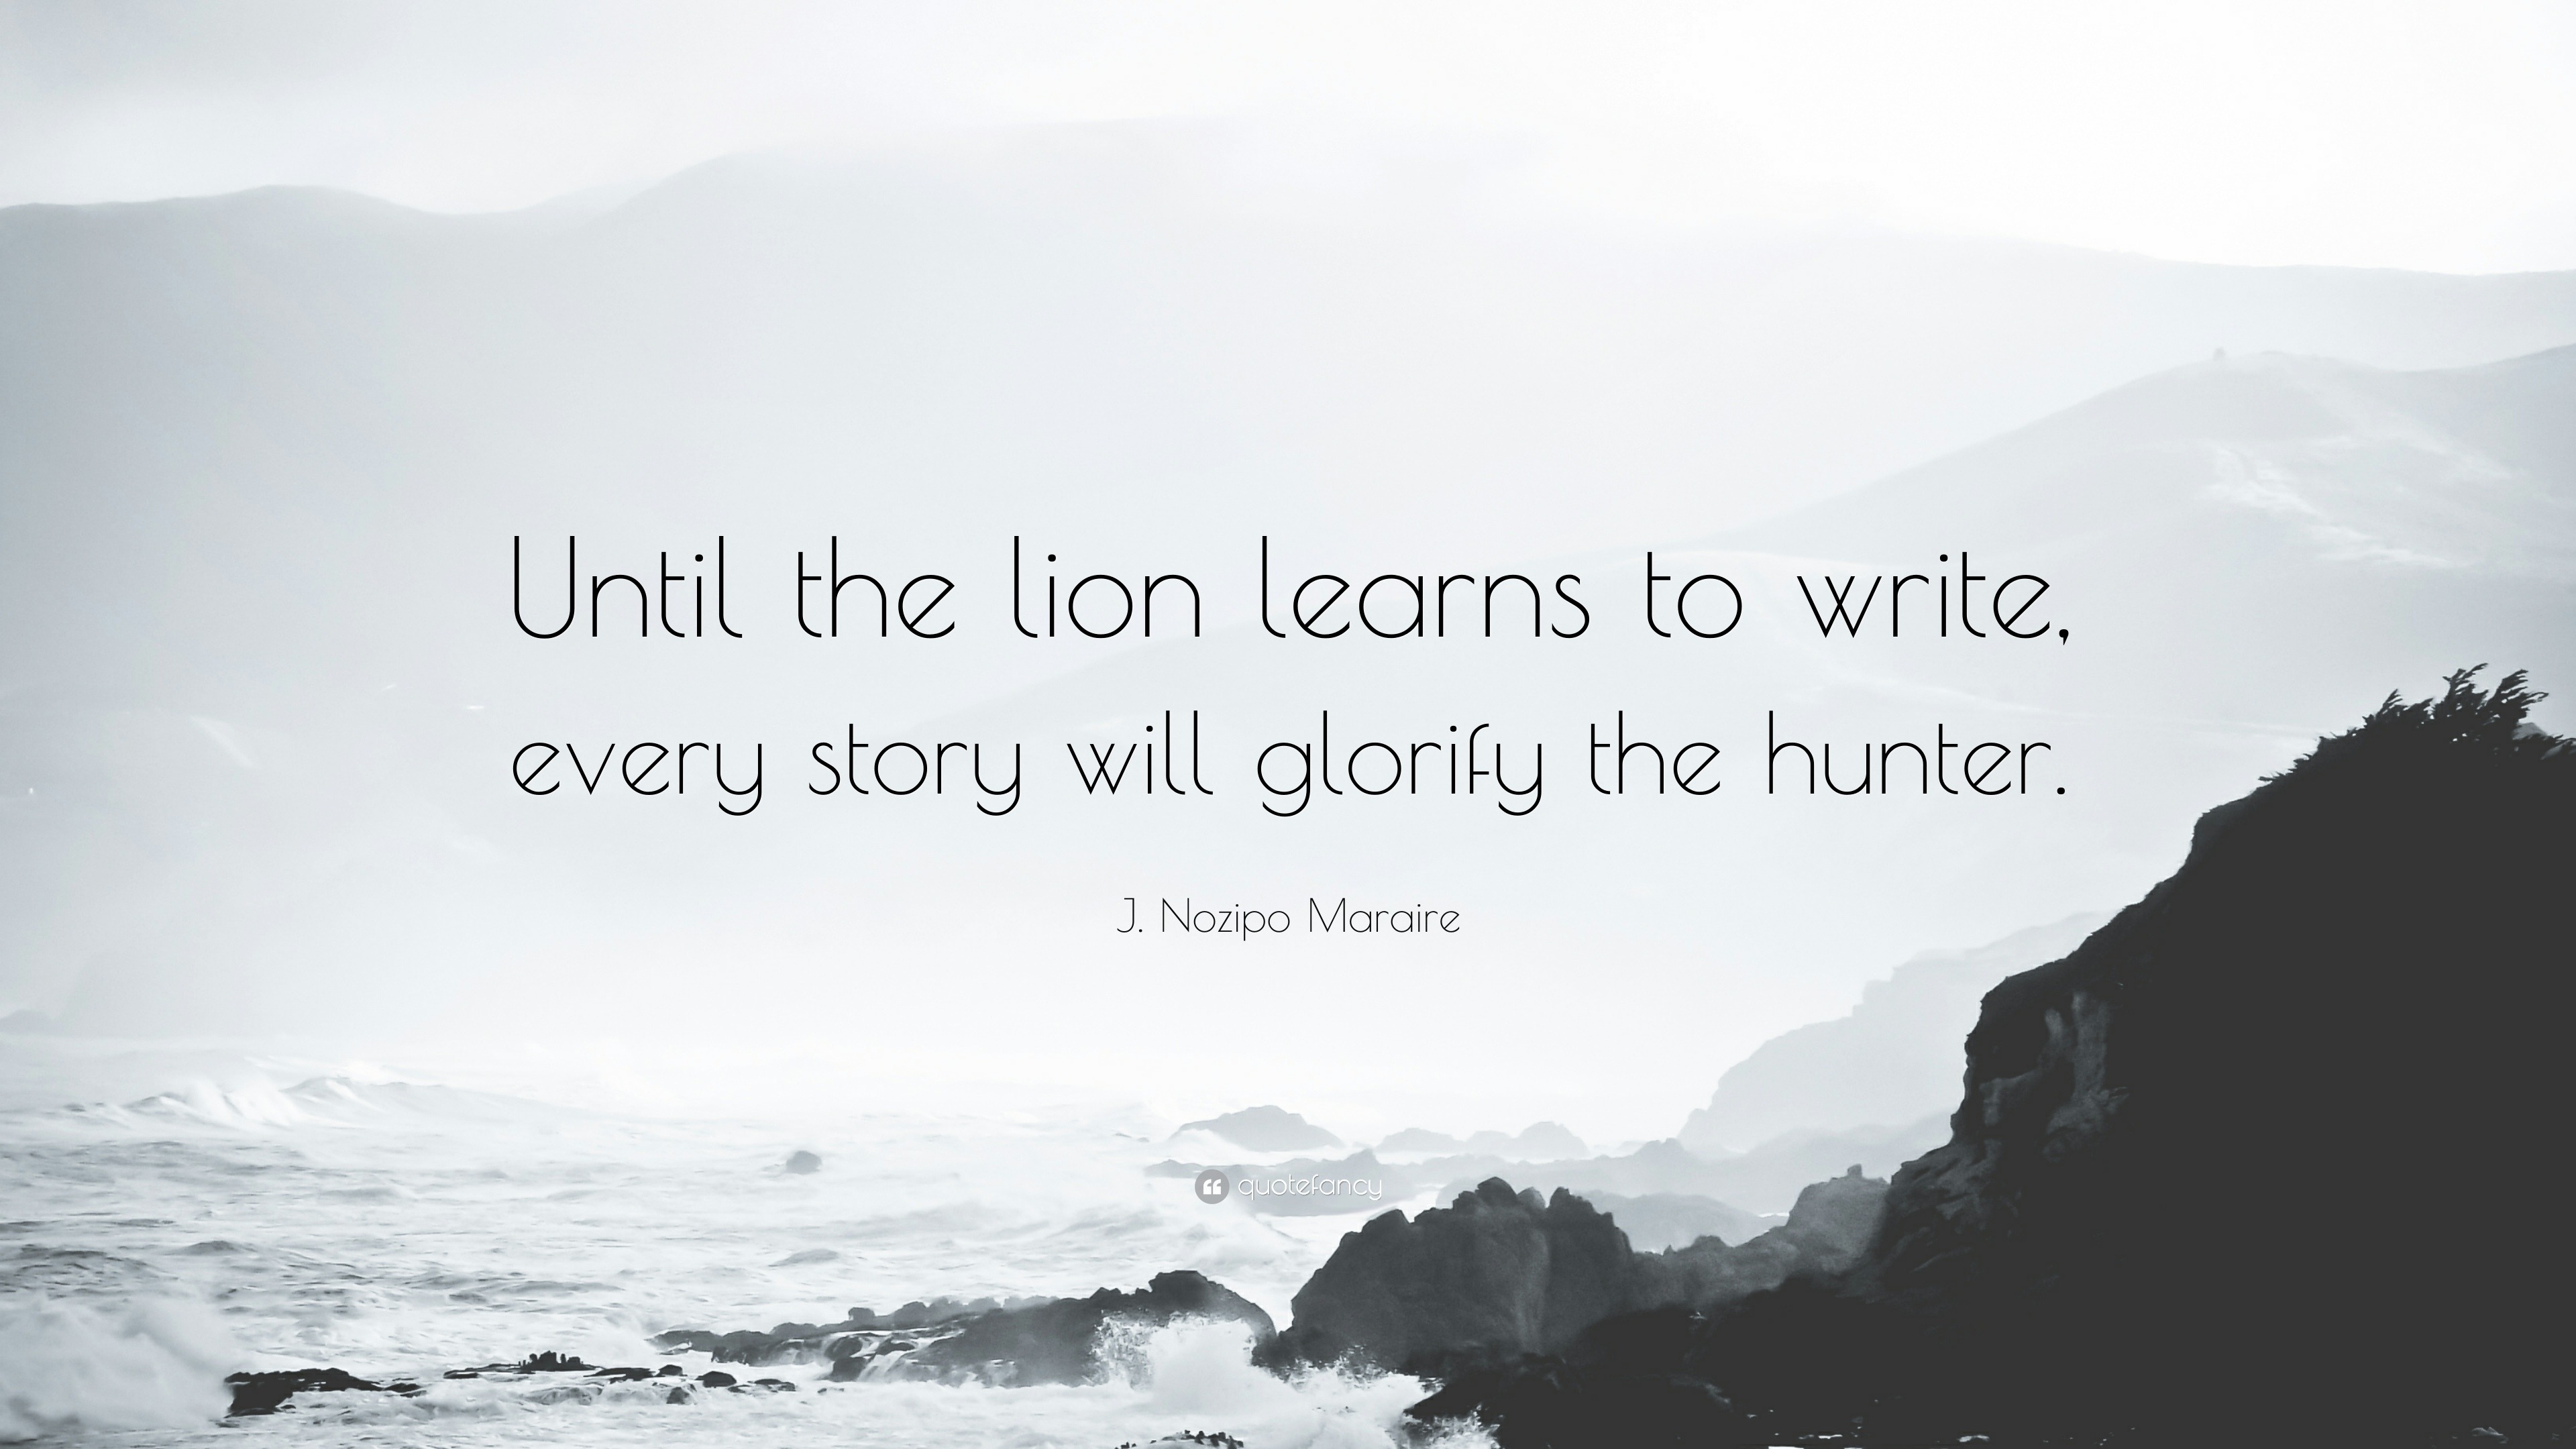 J. Nozipo Maraire Quote: “Until the lion learns to write, every